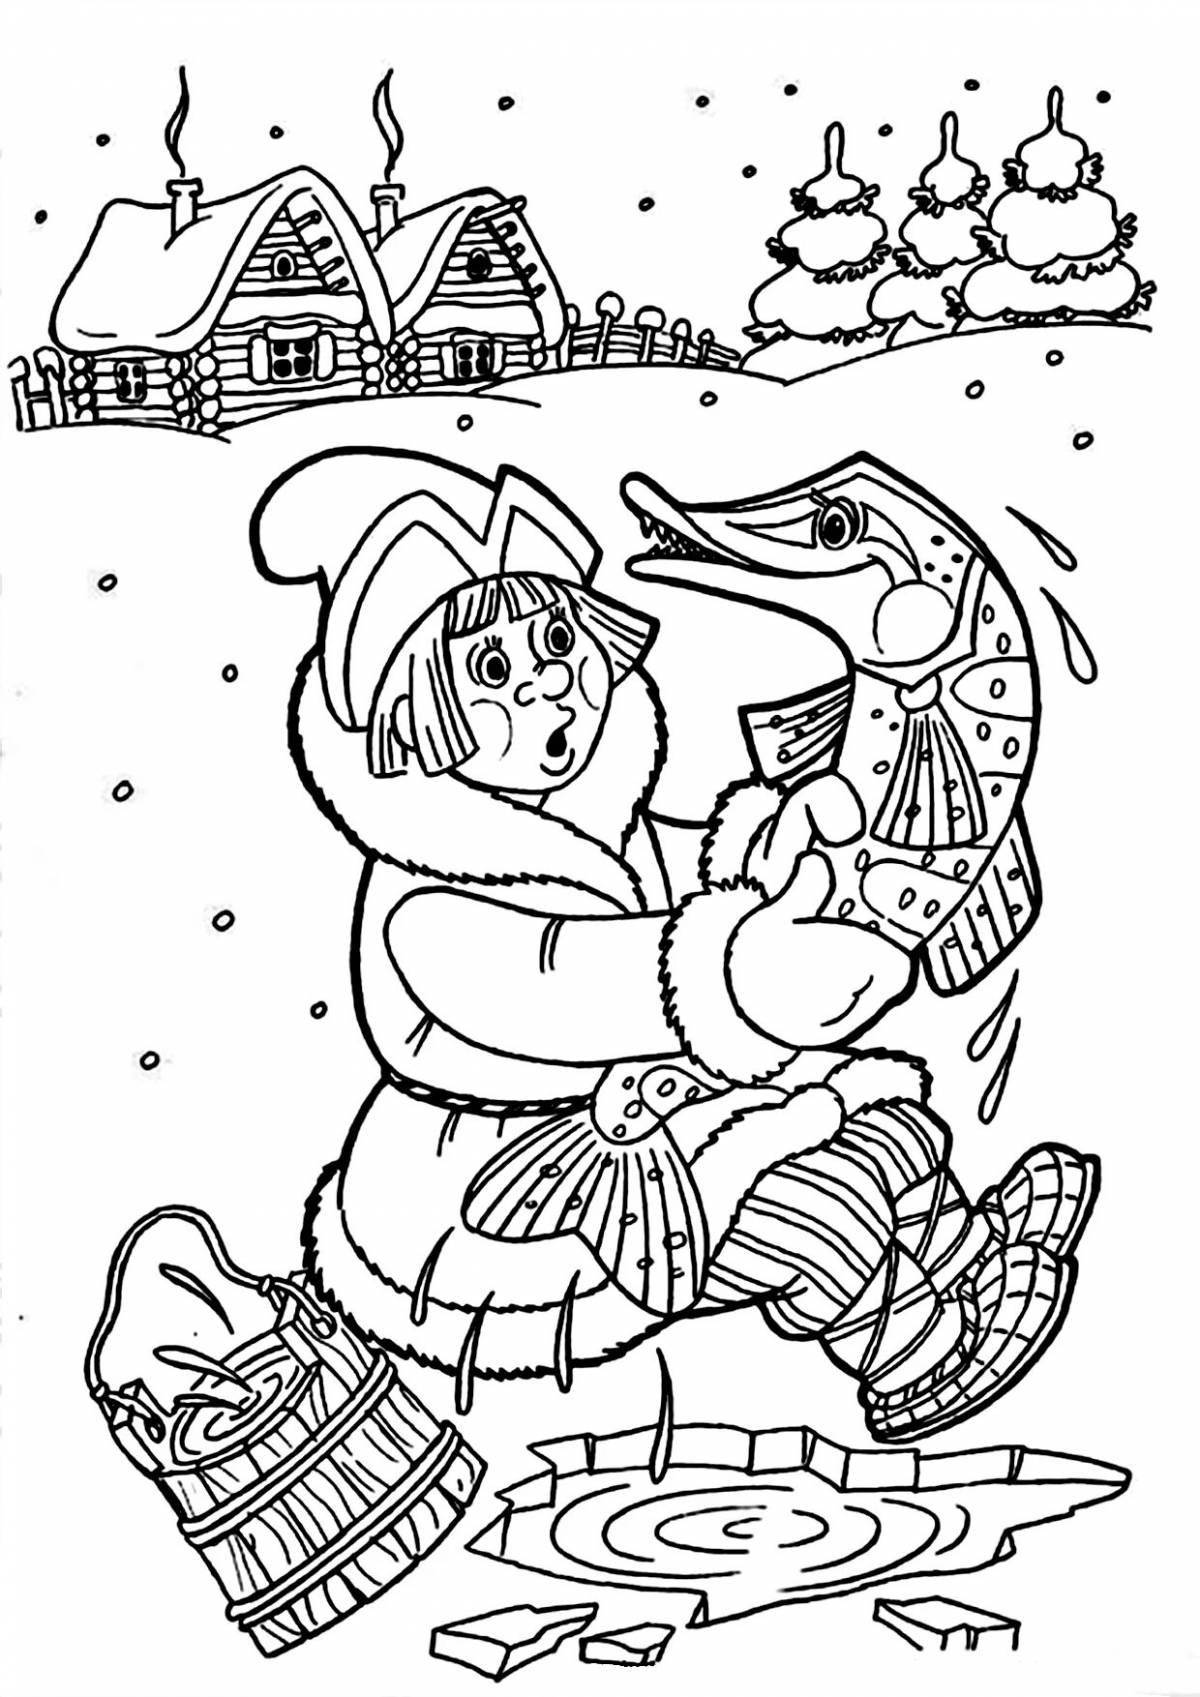 Charming coloring book heroes of fairy tales